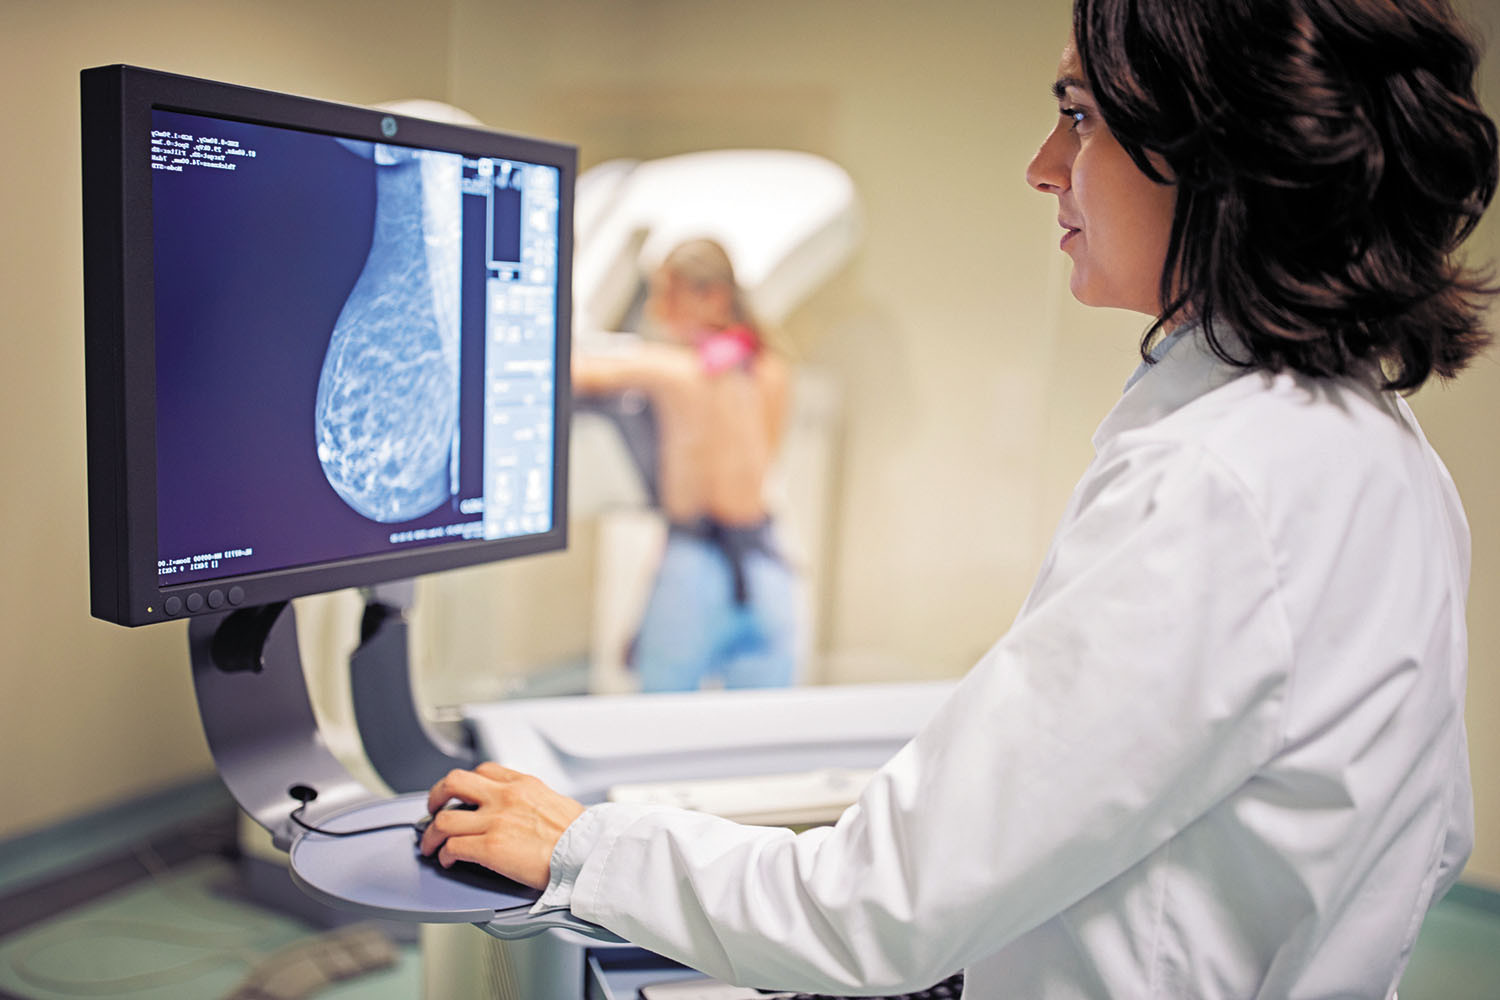 photo of a medical technician viewing mammogram on a computer screen; in the background, out of focus, can be seen the woman being examined with her back to the camera